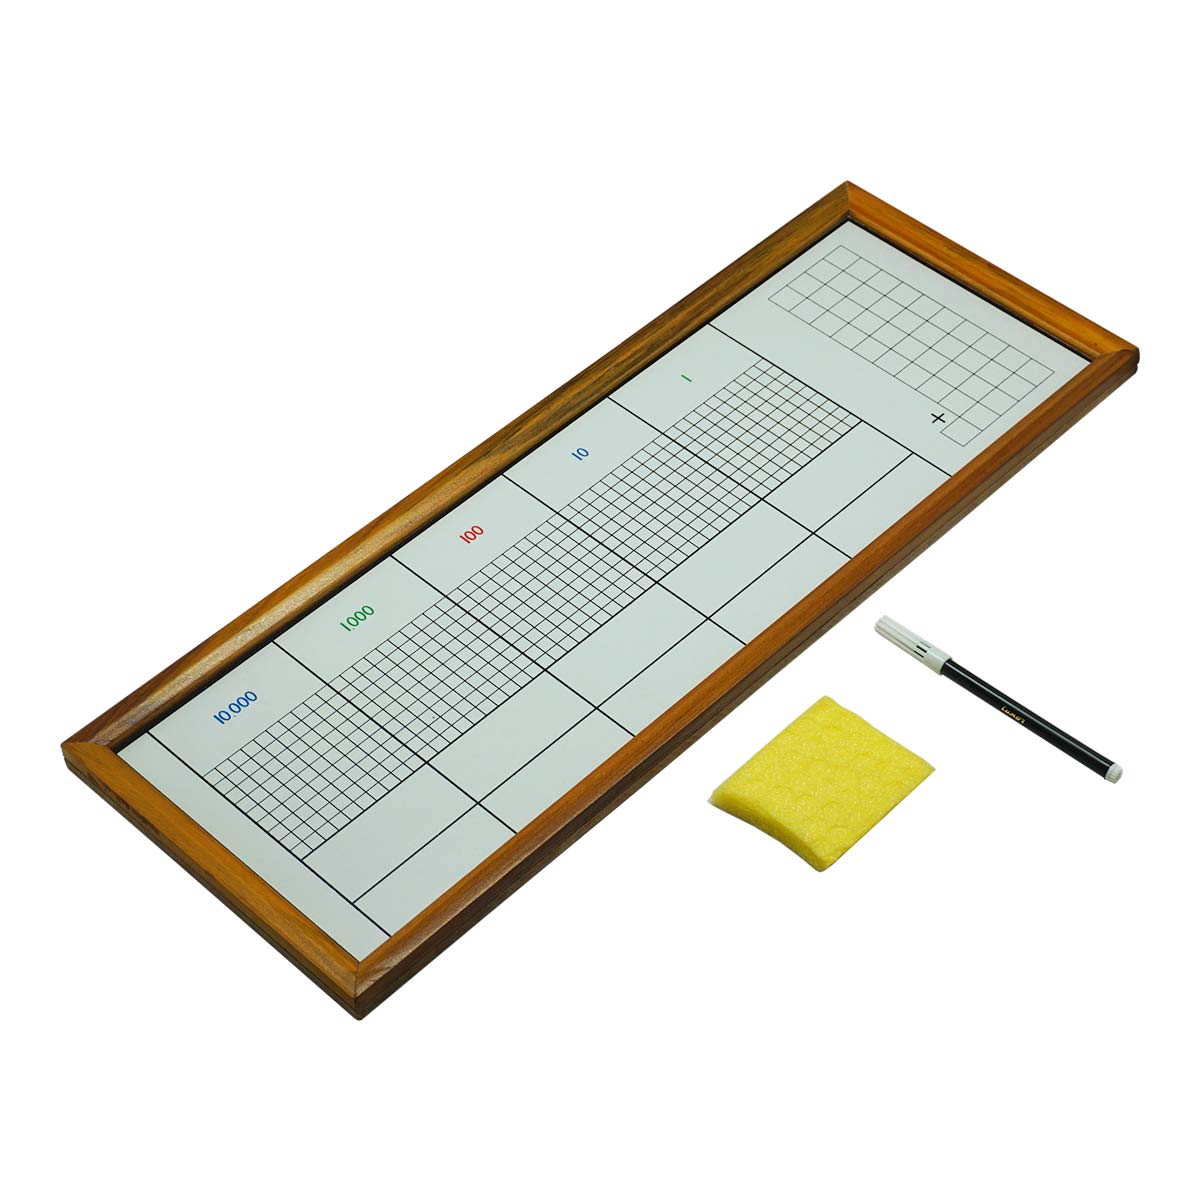 dot-game-montessori-materials-learning-toys-and-furniture-india